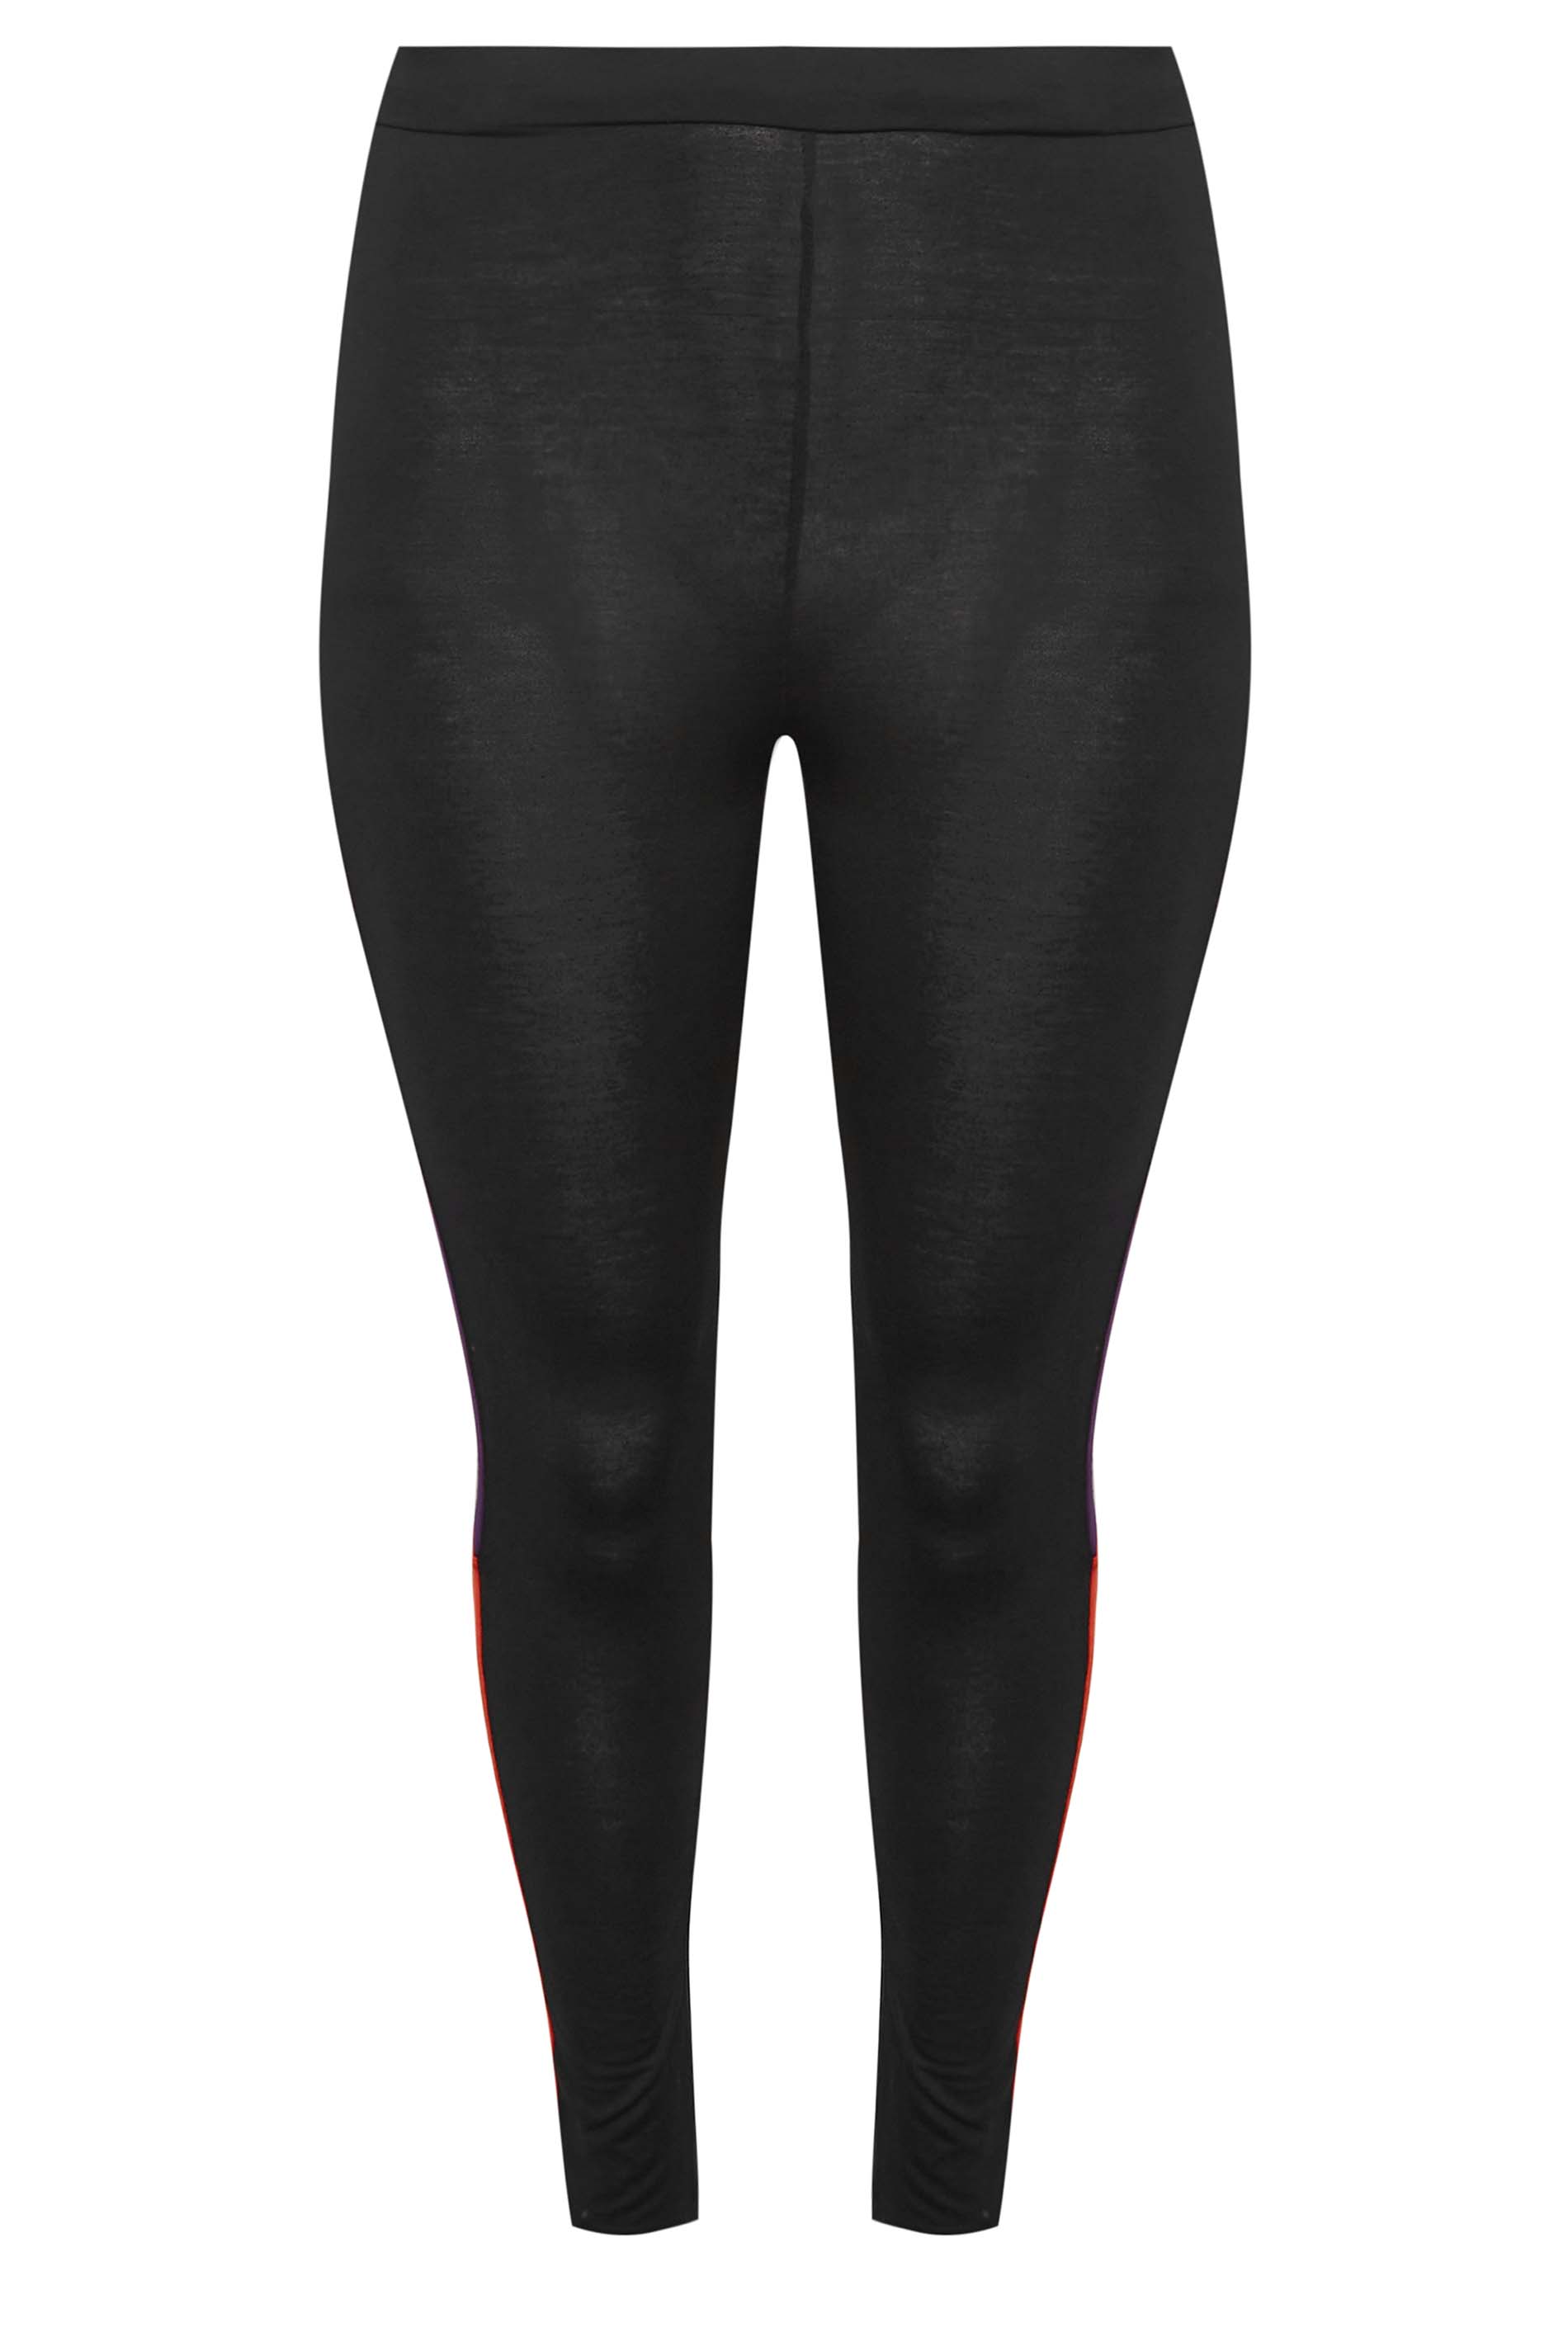 Under Armour Women's Cosy Blocked Tights (Black/White, Size L